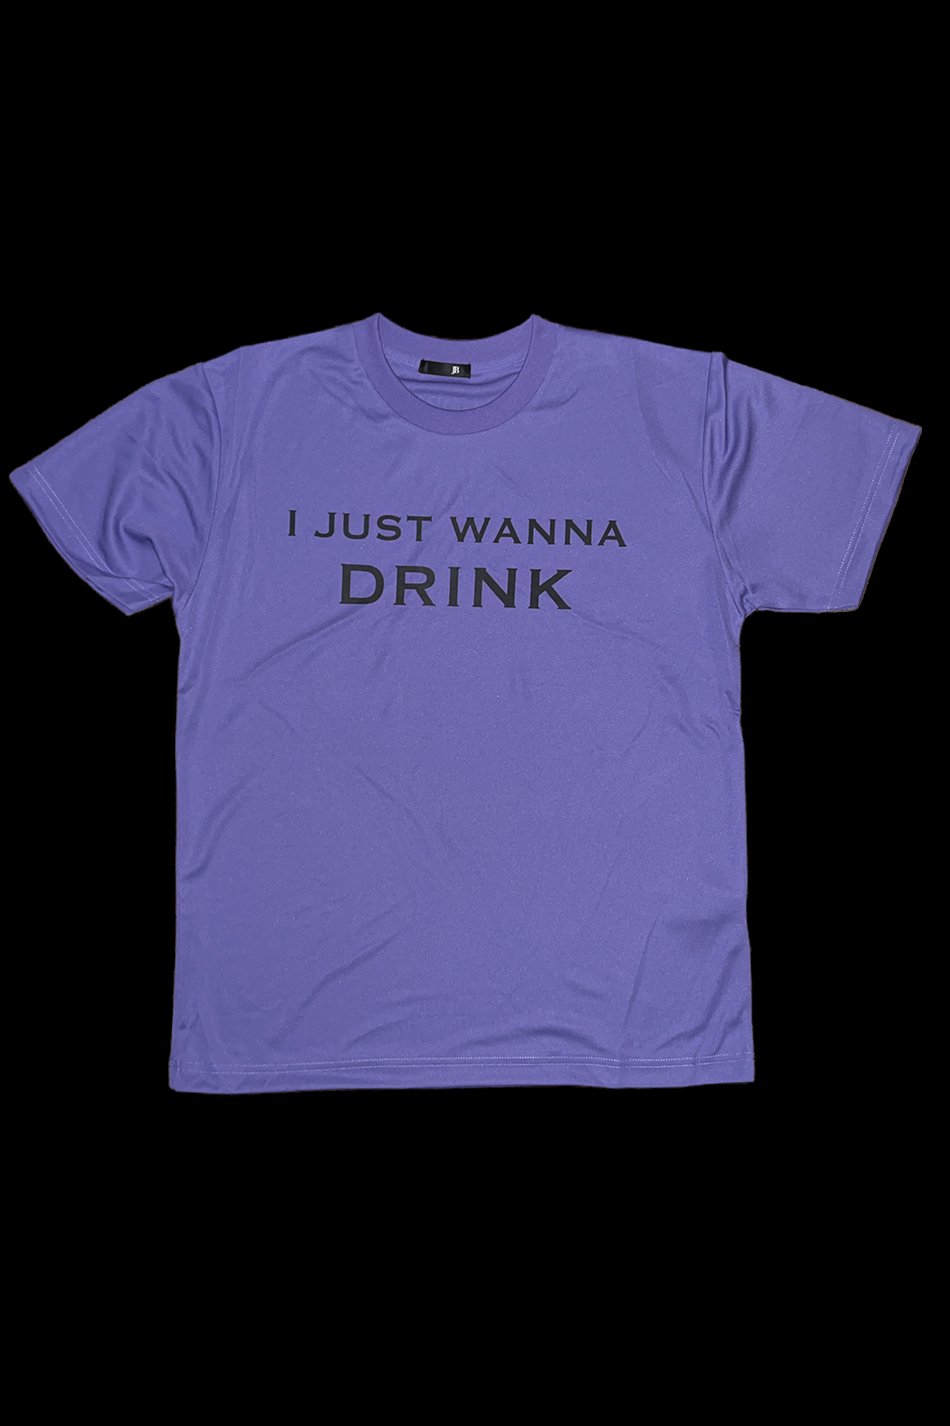 I JUST WANNA DRINK PURPLE / DRY For PUNKS